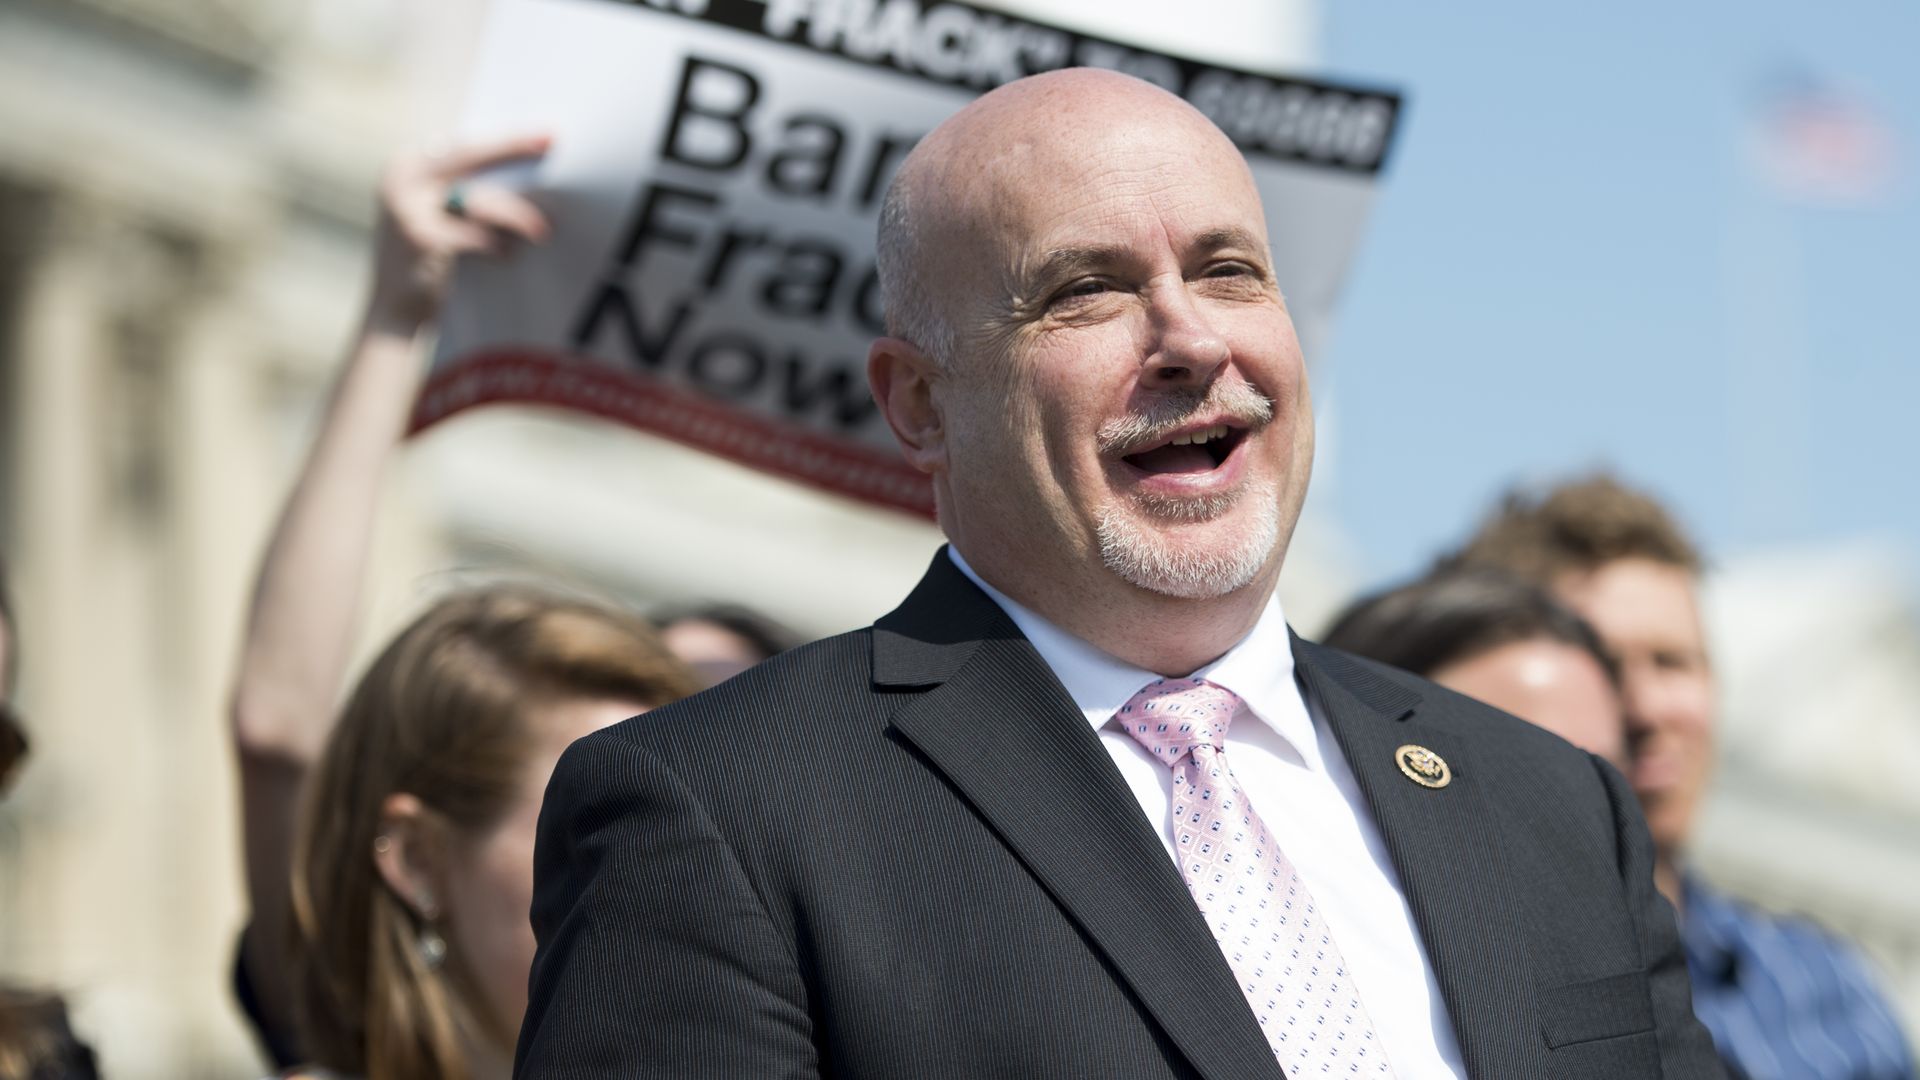 Rep. Mark Pocan is seen speaking in front of the Capitol.